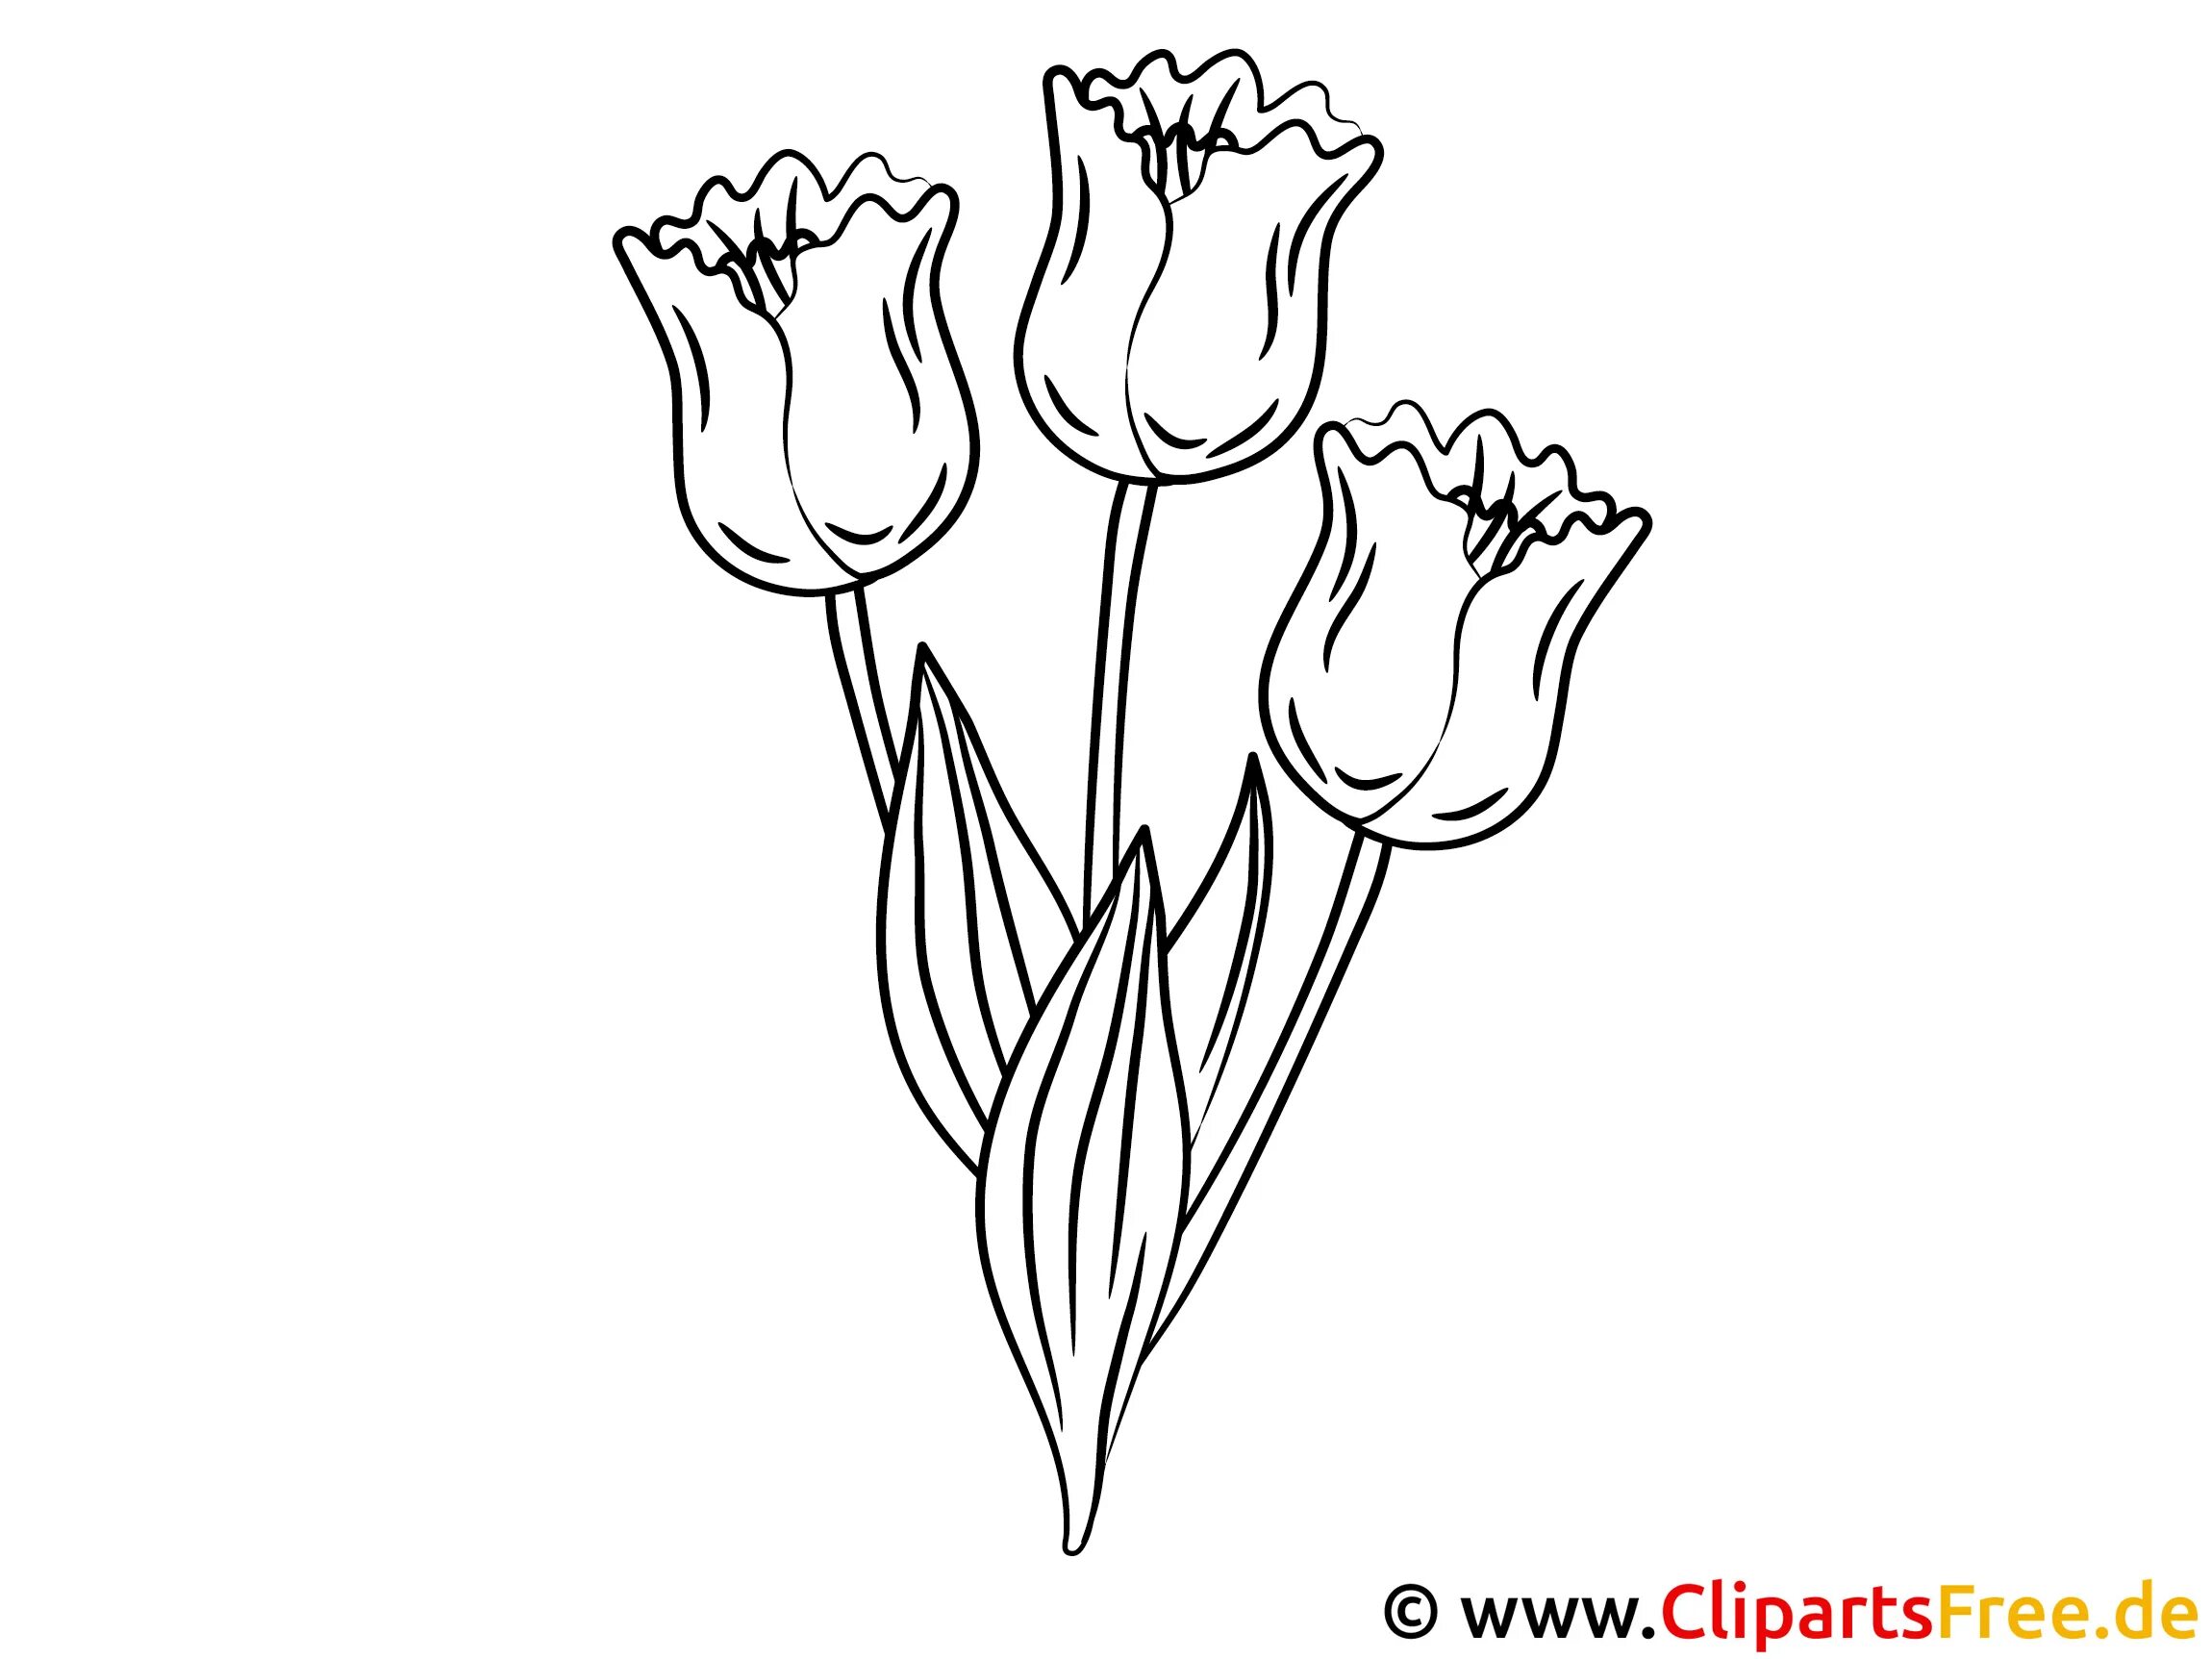 Coloring page joyful tulips for children 5-6 years old